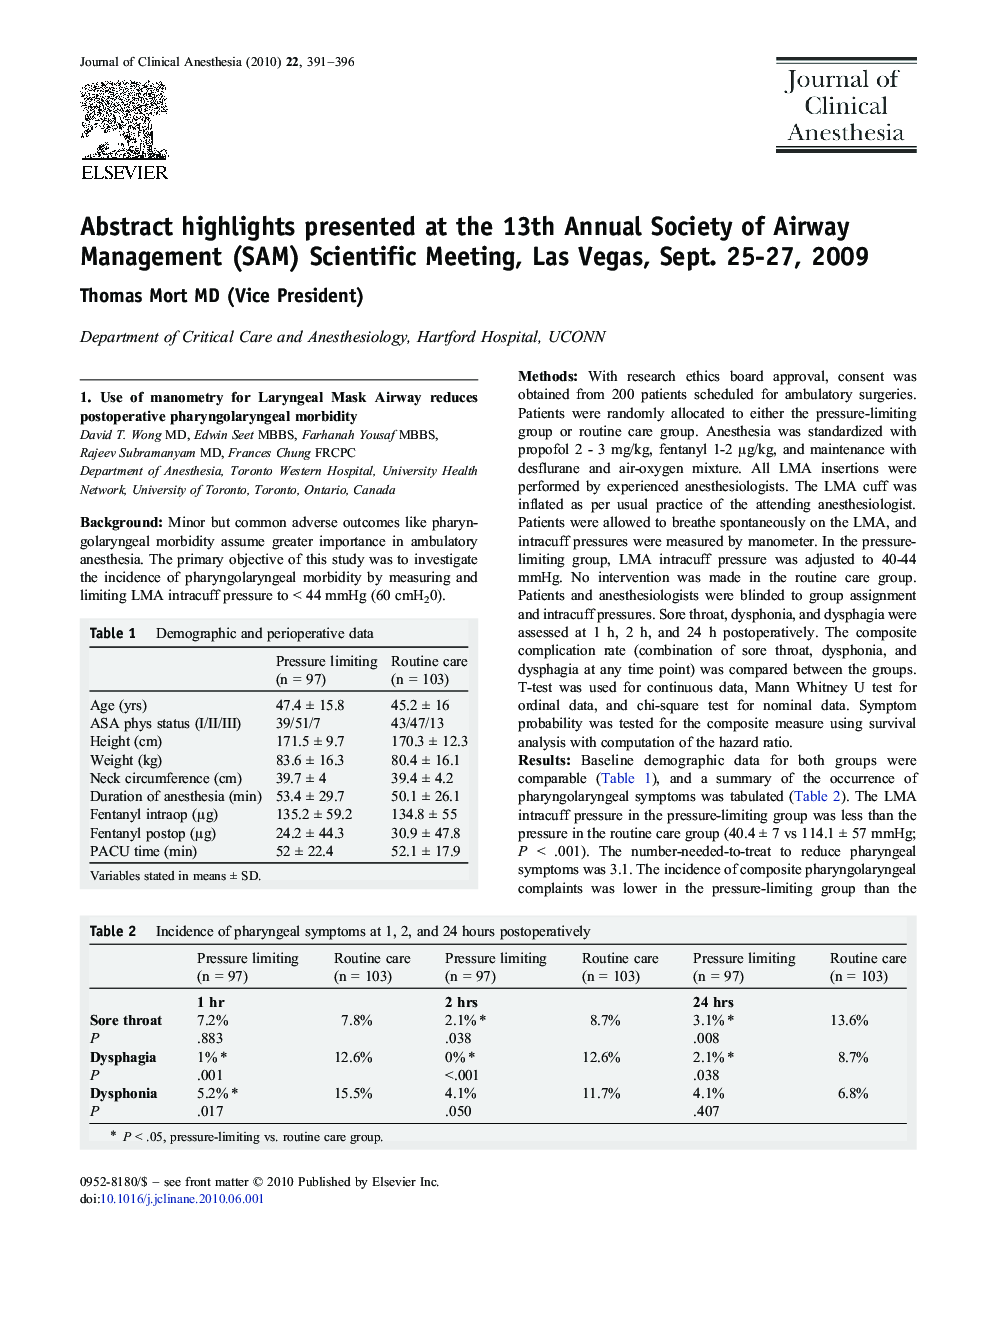 Abstract highlights presented at the 13th Annual Society of Airway Management (SAM) Scientific Meeting, Las Vegas, Sept. 25-27, 2009